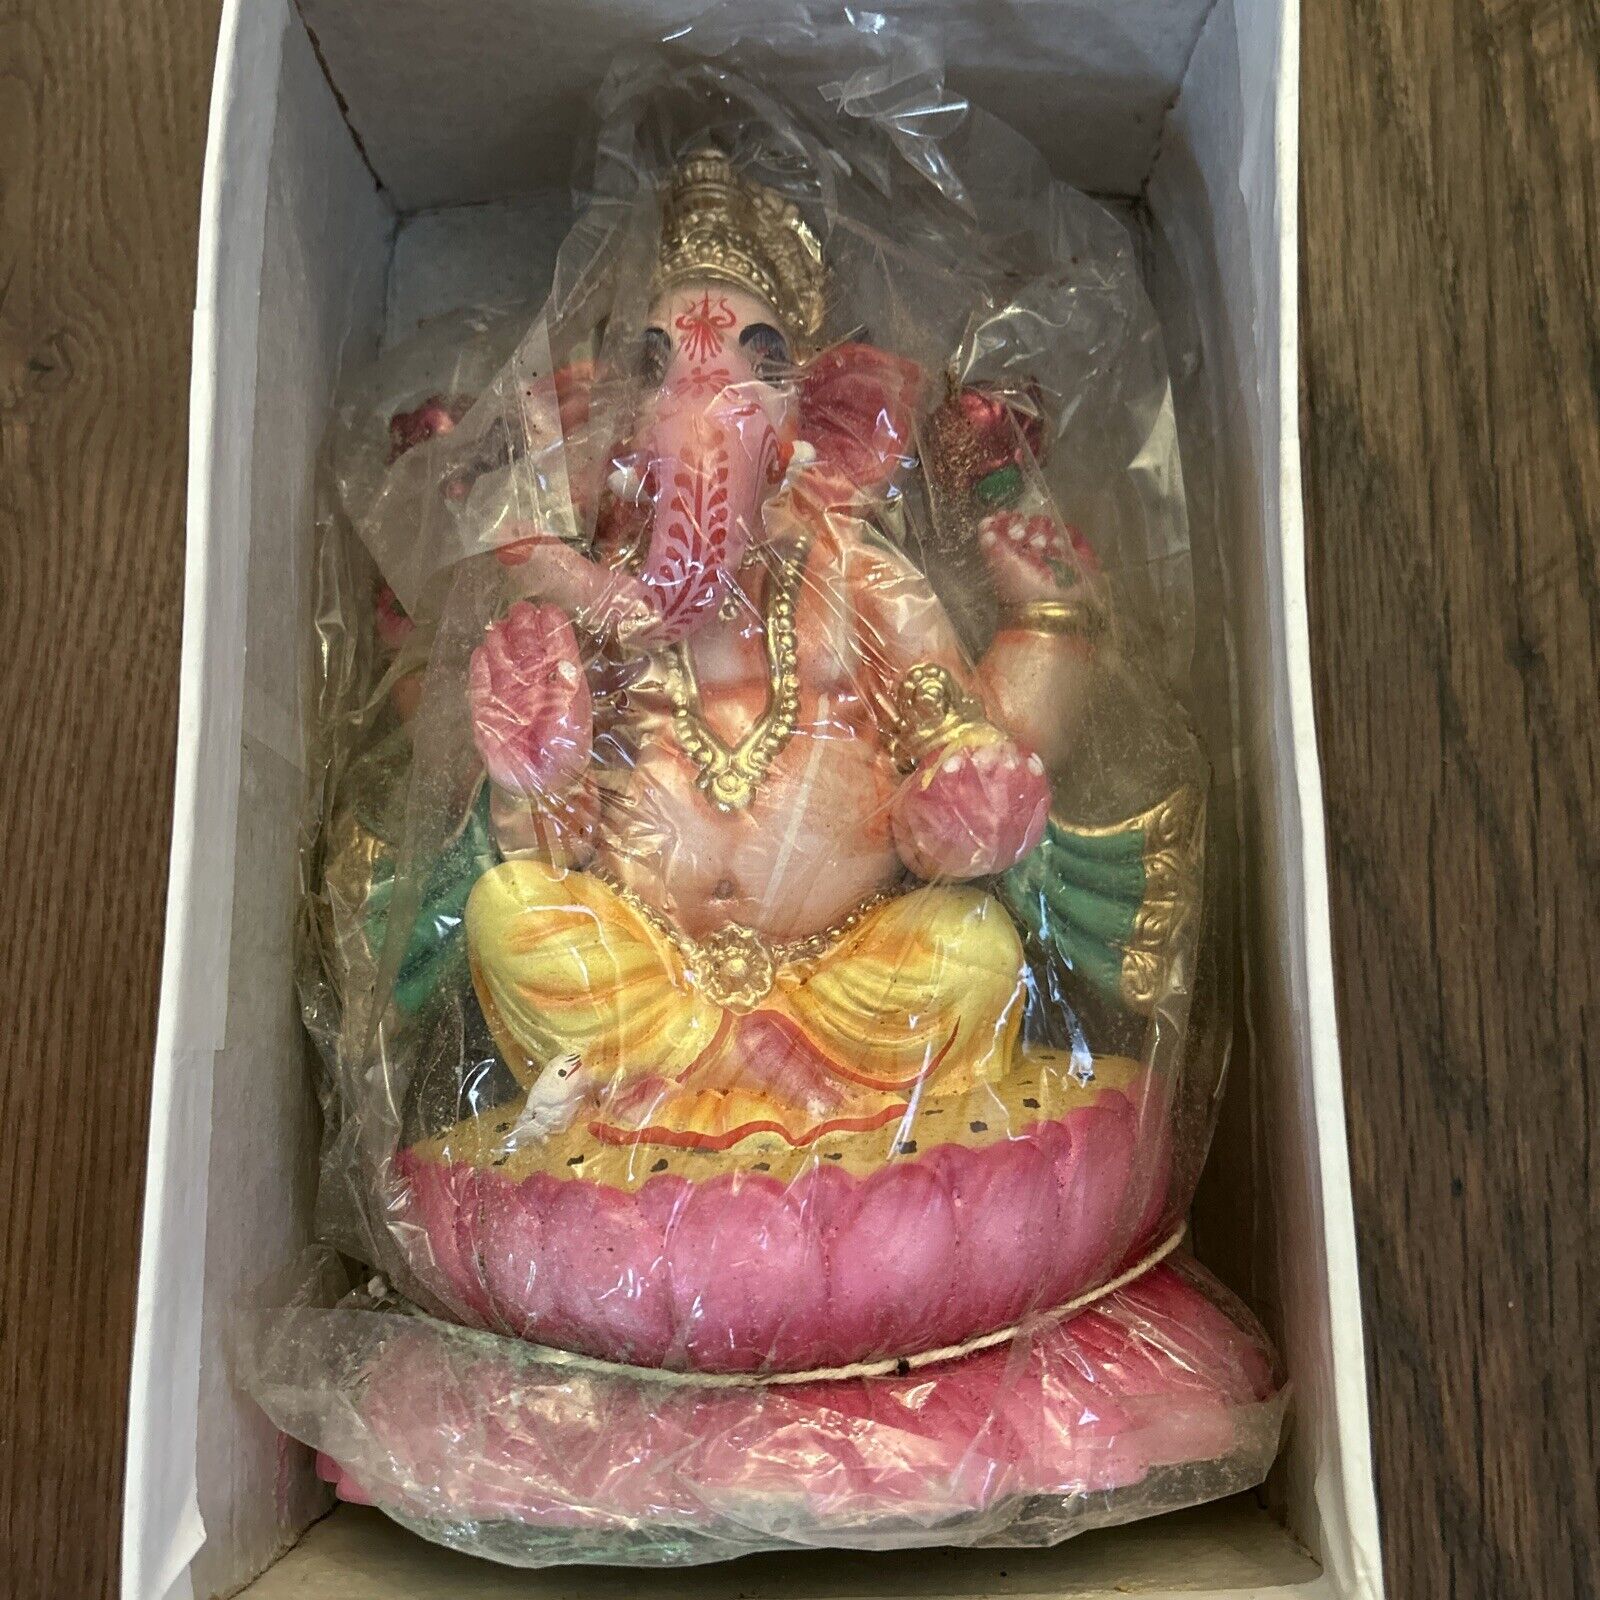 9” Handmade Colorful Painted Lord Ganesha Clay Sculpture Statue- USA Seller